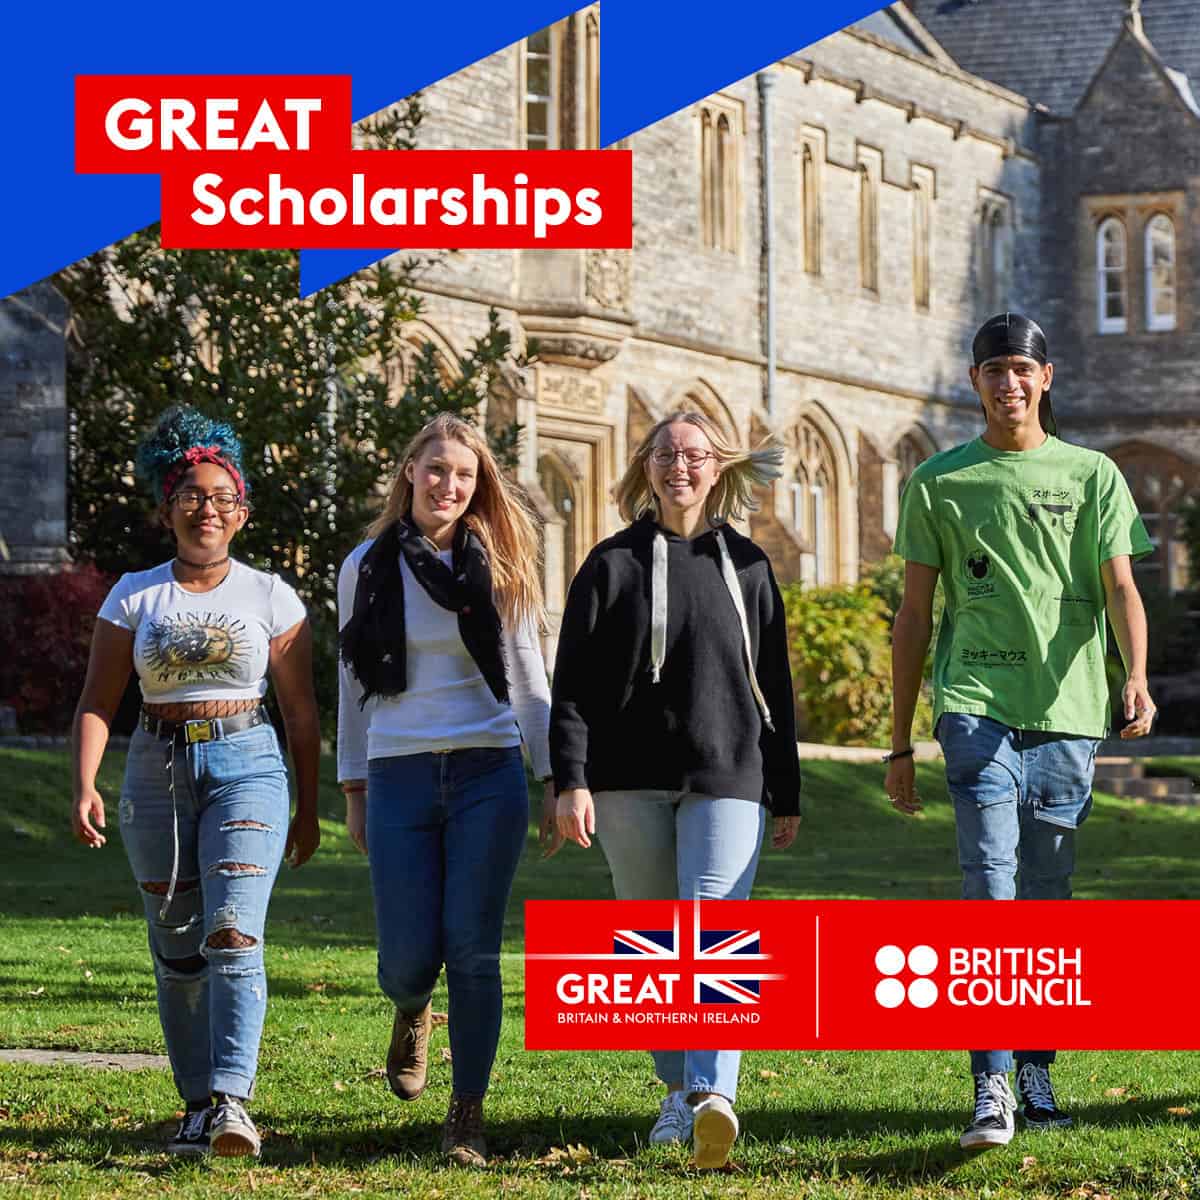 Apply academic opportunities with #GREATScholarships! 70+ UK universities offer £10,000 #scholarships for Masters programs. Apply now: shorturl.at/egEV7🎓💰 #HigherEd #UKStudy